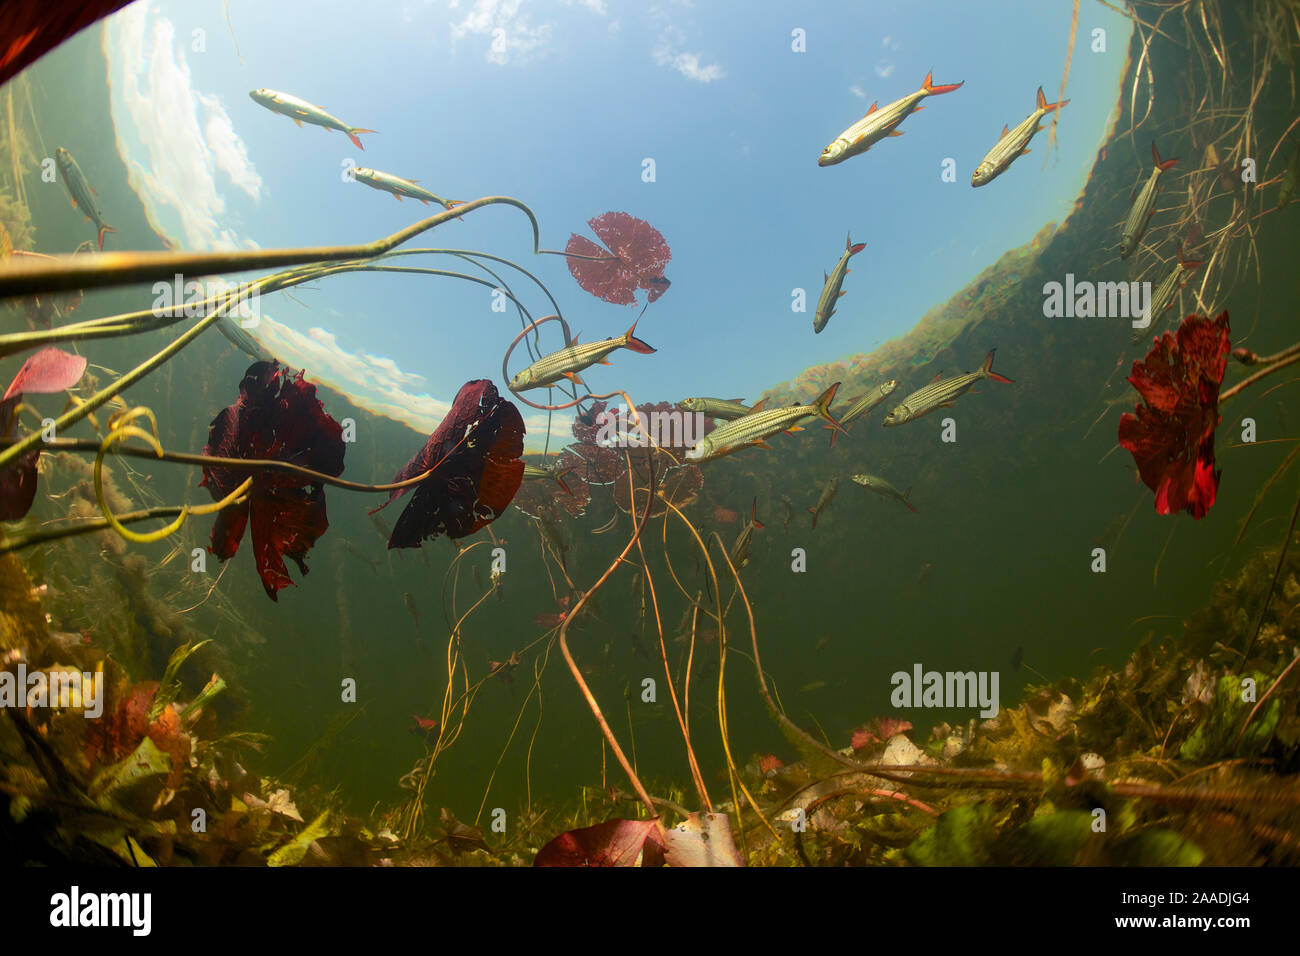 Underwater view of African tigerfish (Hydrocynus vittatus), predatory fish in the Okavango river with Water lily (Nymphaea nouchali var. caerulea) and other aquatic plants. Okavango Delta, Botswana,  June 2014 . Photographed for The Freshwater Project Stock Photo